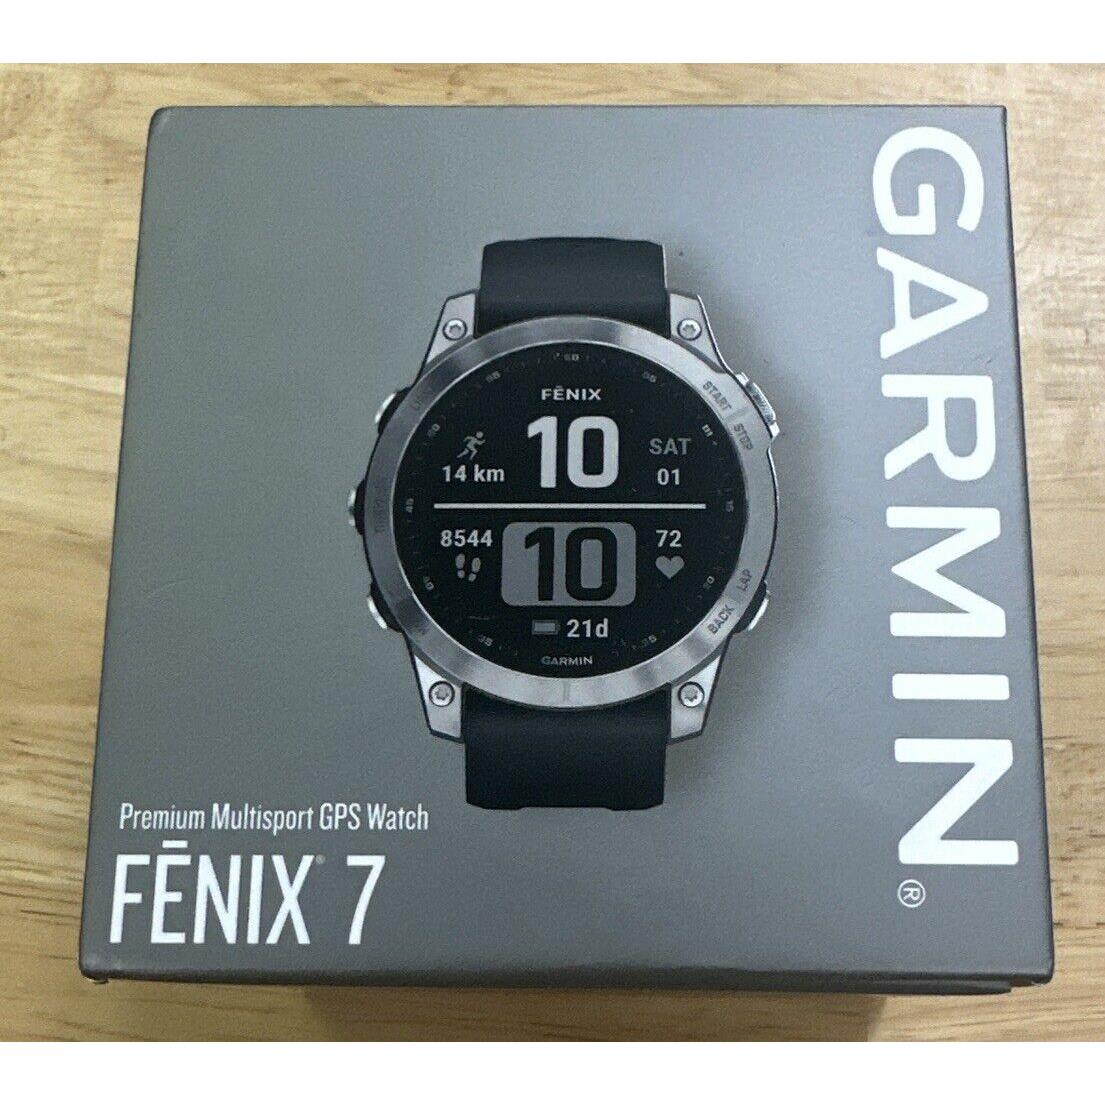 Garmin Fenix 7 Standard Edition Smartwatch with Gps Touchscreen and Fitness